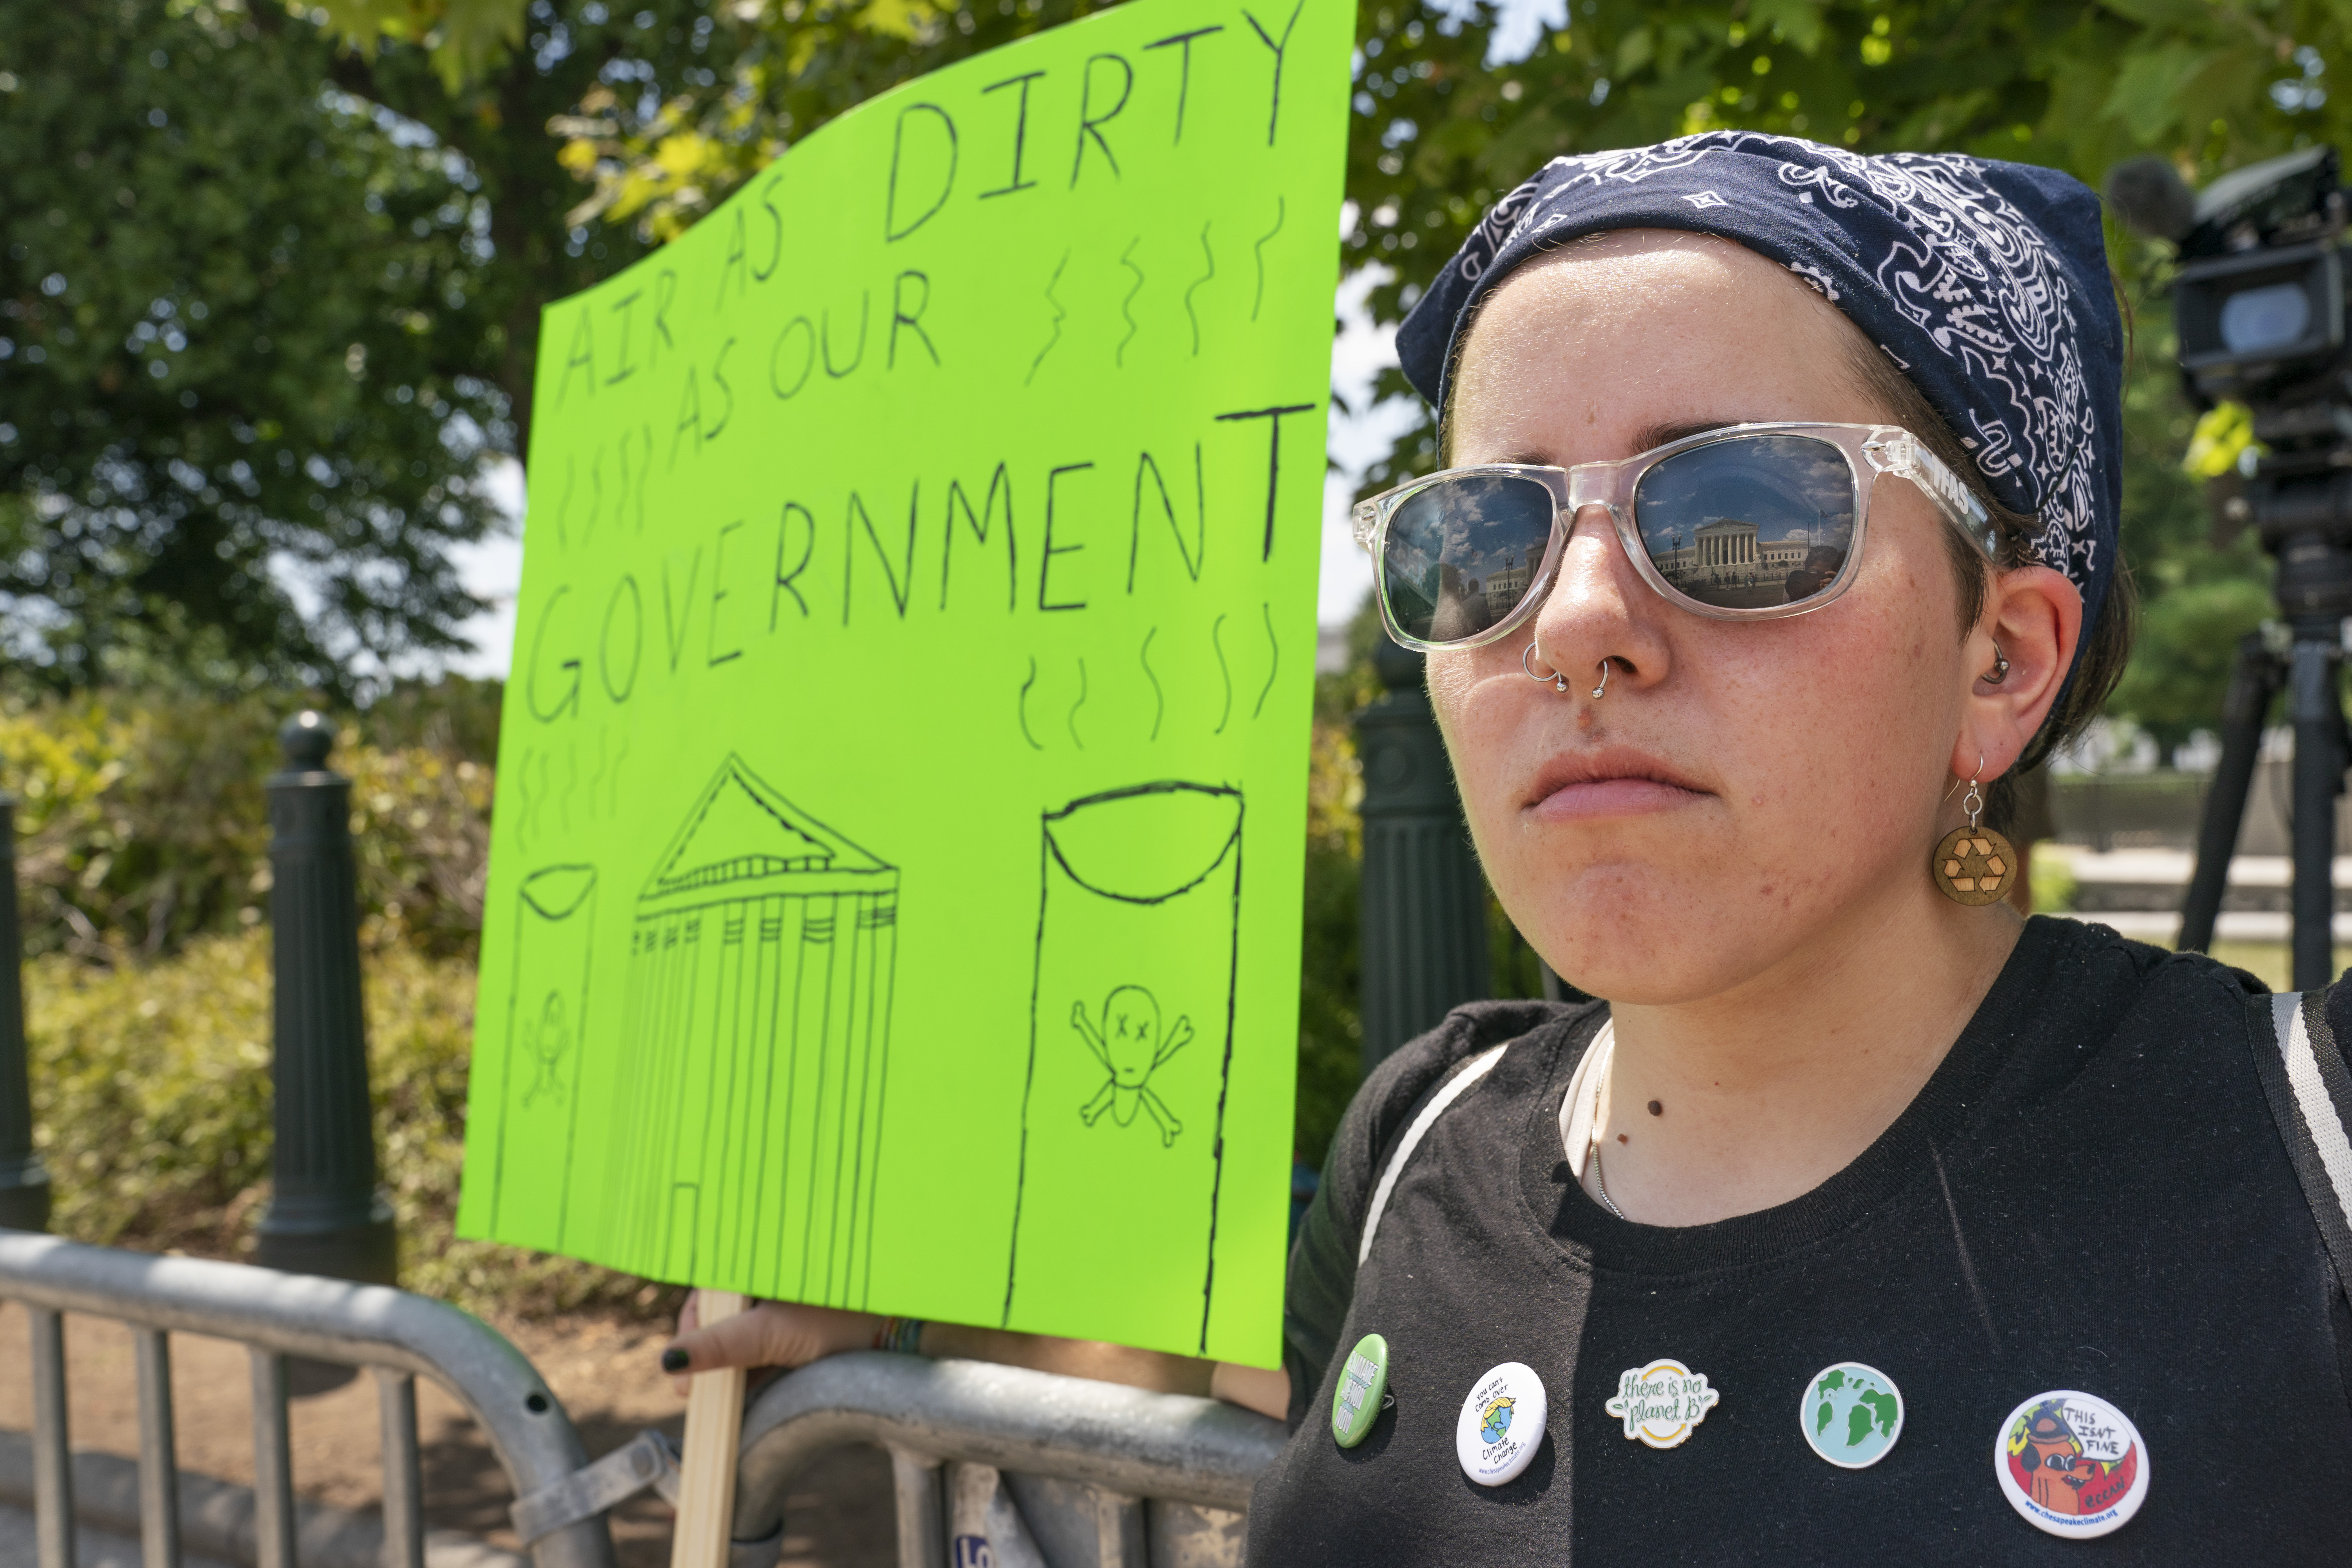 A woman protest against climate change after the Supreme Court's EPA decision.